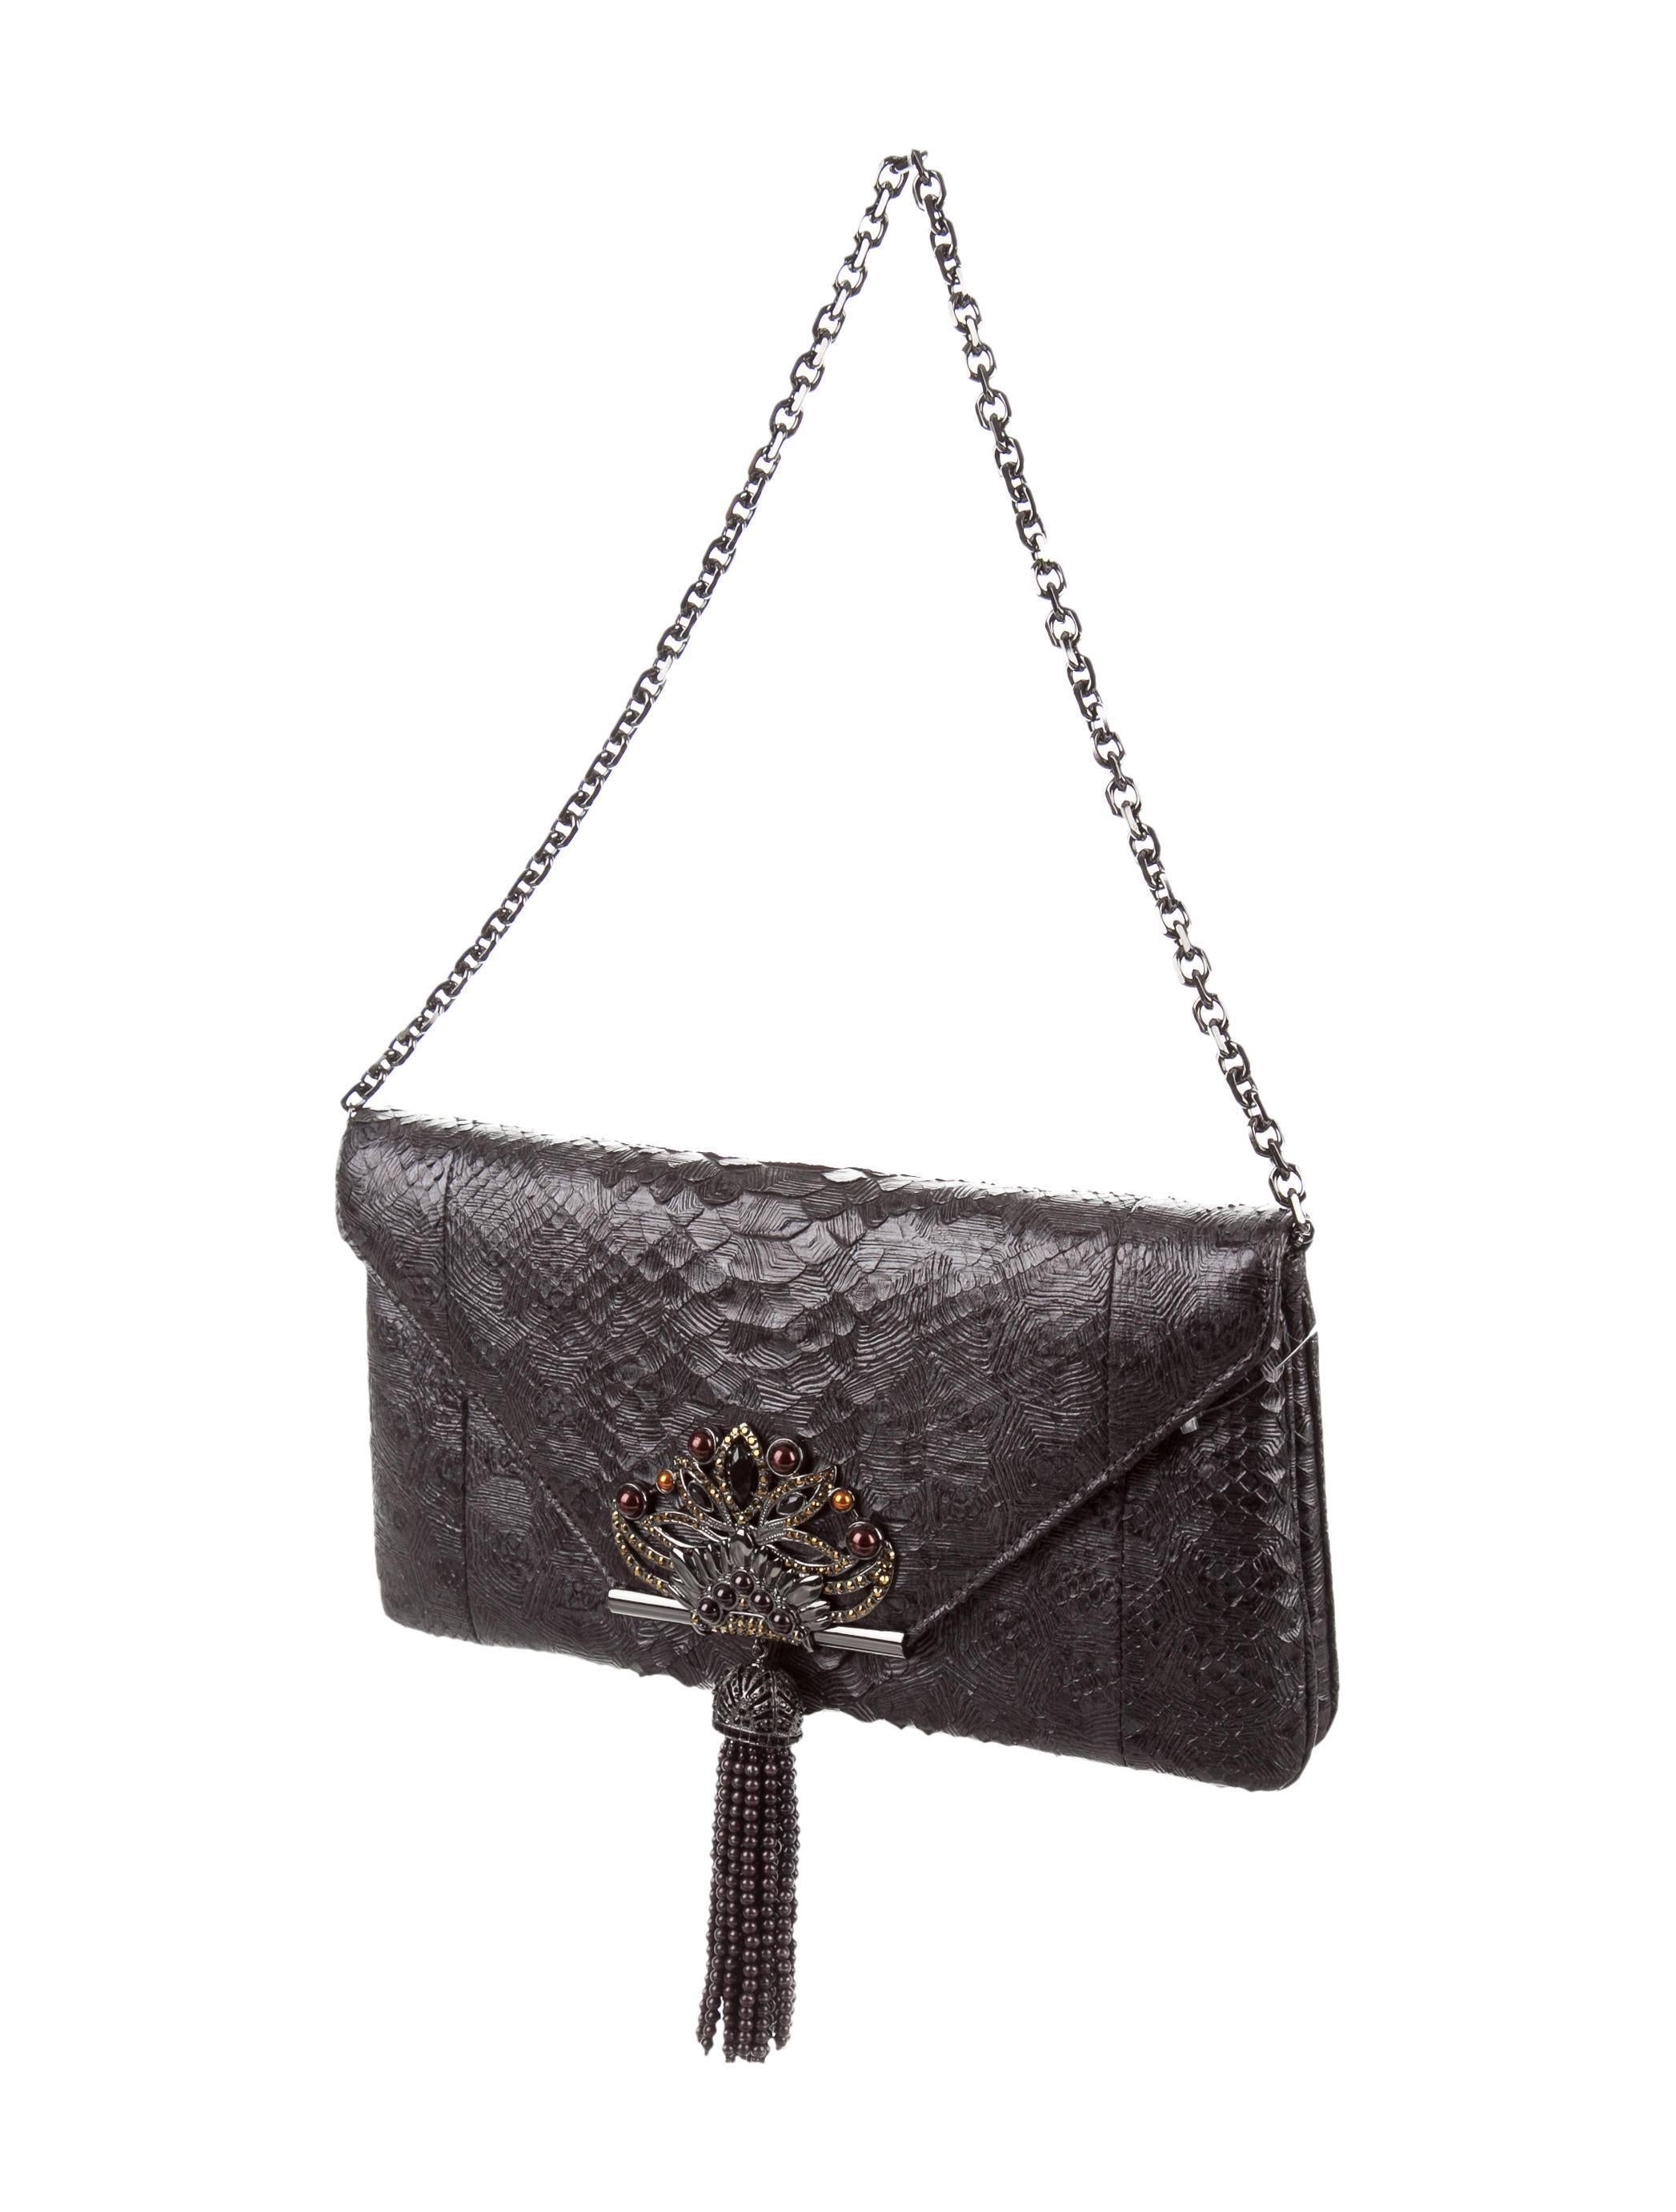 CURATOR'S NOTES

INCREDIBLY priced to sell. Simply stunning!

Original retail price $3,995
Python 
Gunmetal tone hardware
Bead and gem accents 
Satin lining
Magnetic snap closure 
Removable shoulder strap drop 8.5"
Measures 11.5" W x